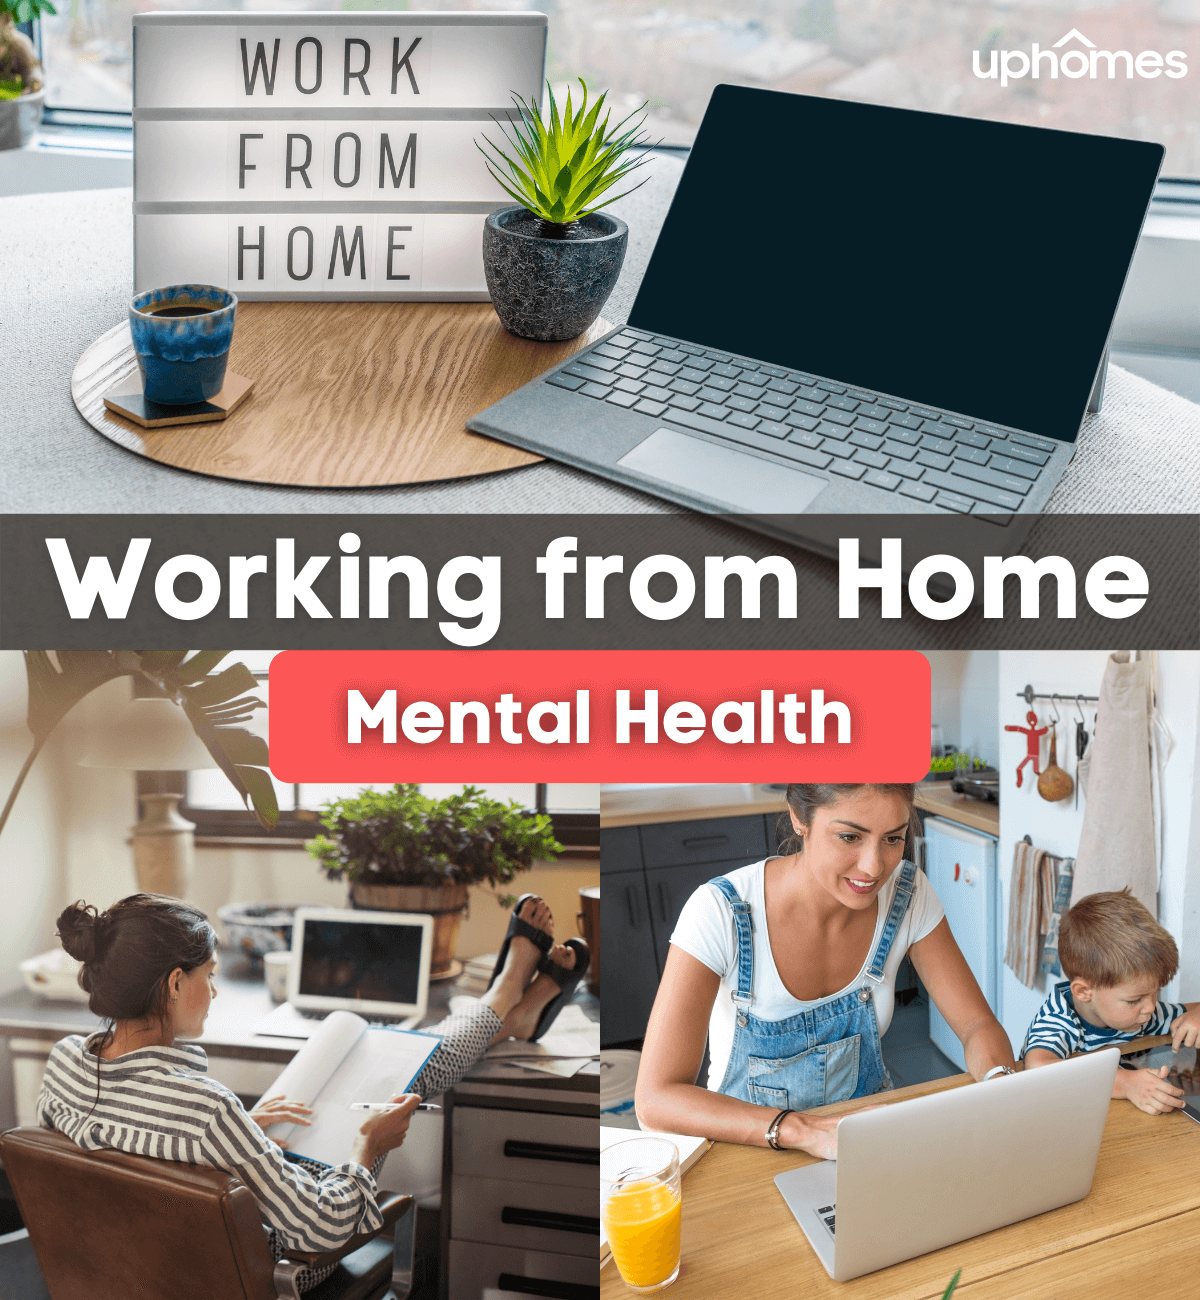 Work From Home: How to Improve Mental Health When Working From Home